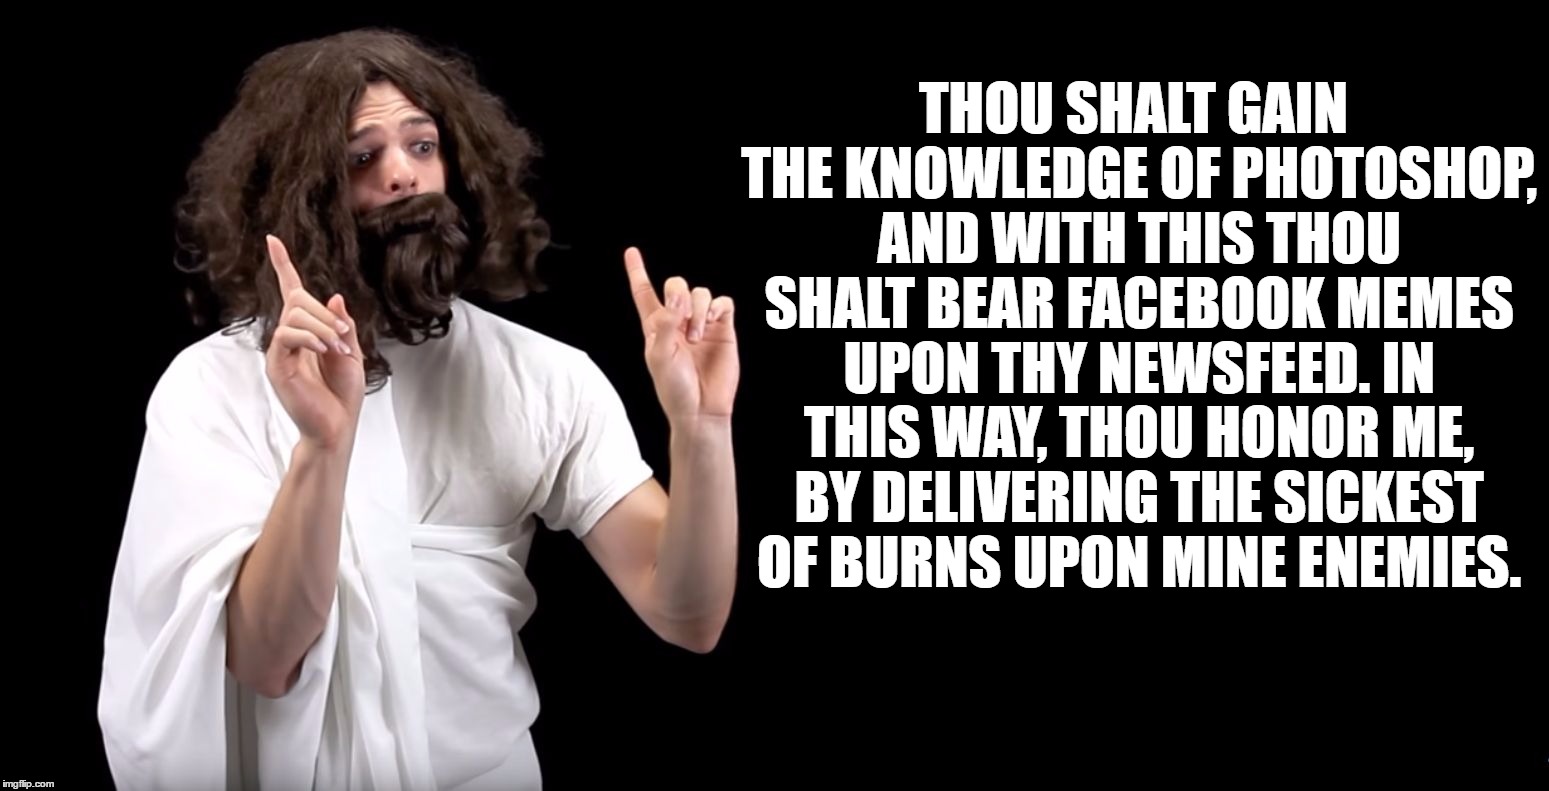 Blimey Jesus | THOU SHALT GAIN THE KNOWLEDGE OF PHOTOSHOP, AND WITH THIS THOU SHALT BEAR FACEBOOK MEMES UPON THY NEWSFEED. IN THIS WAY, THOU HONOR ME, BY DELIVERING THE SICKEST OF BURNS UPON MINE ENEMIES. | image tagged in blimey jesus,blimey cow,jesus,memes,imgflip,facebook | made w/ Imgflip meme maker